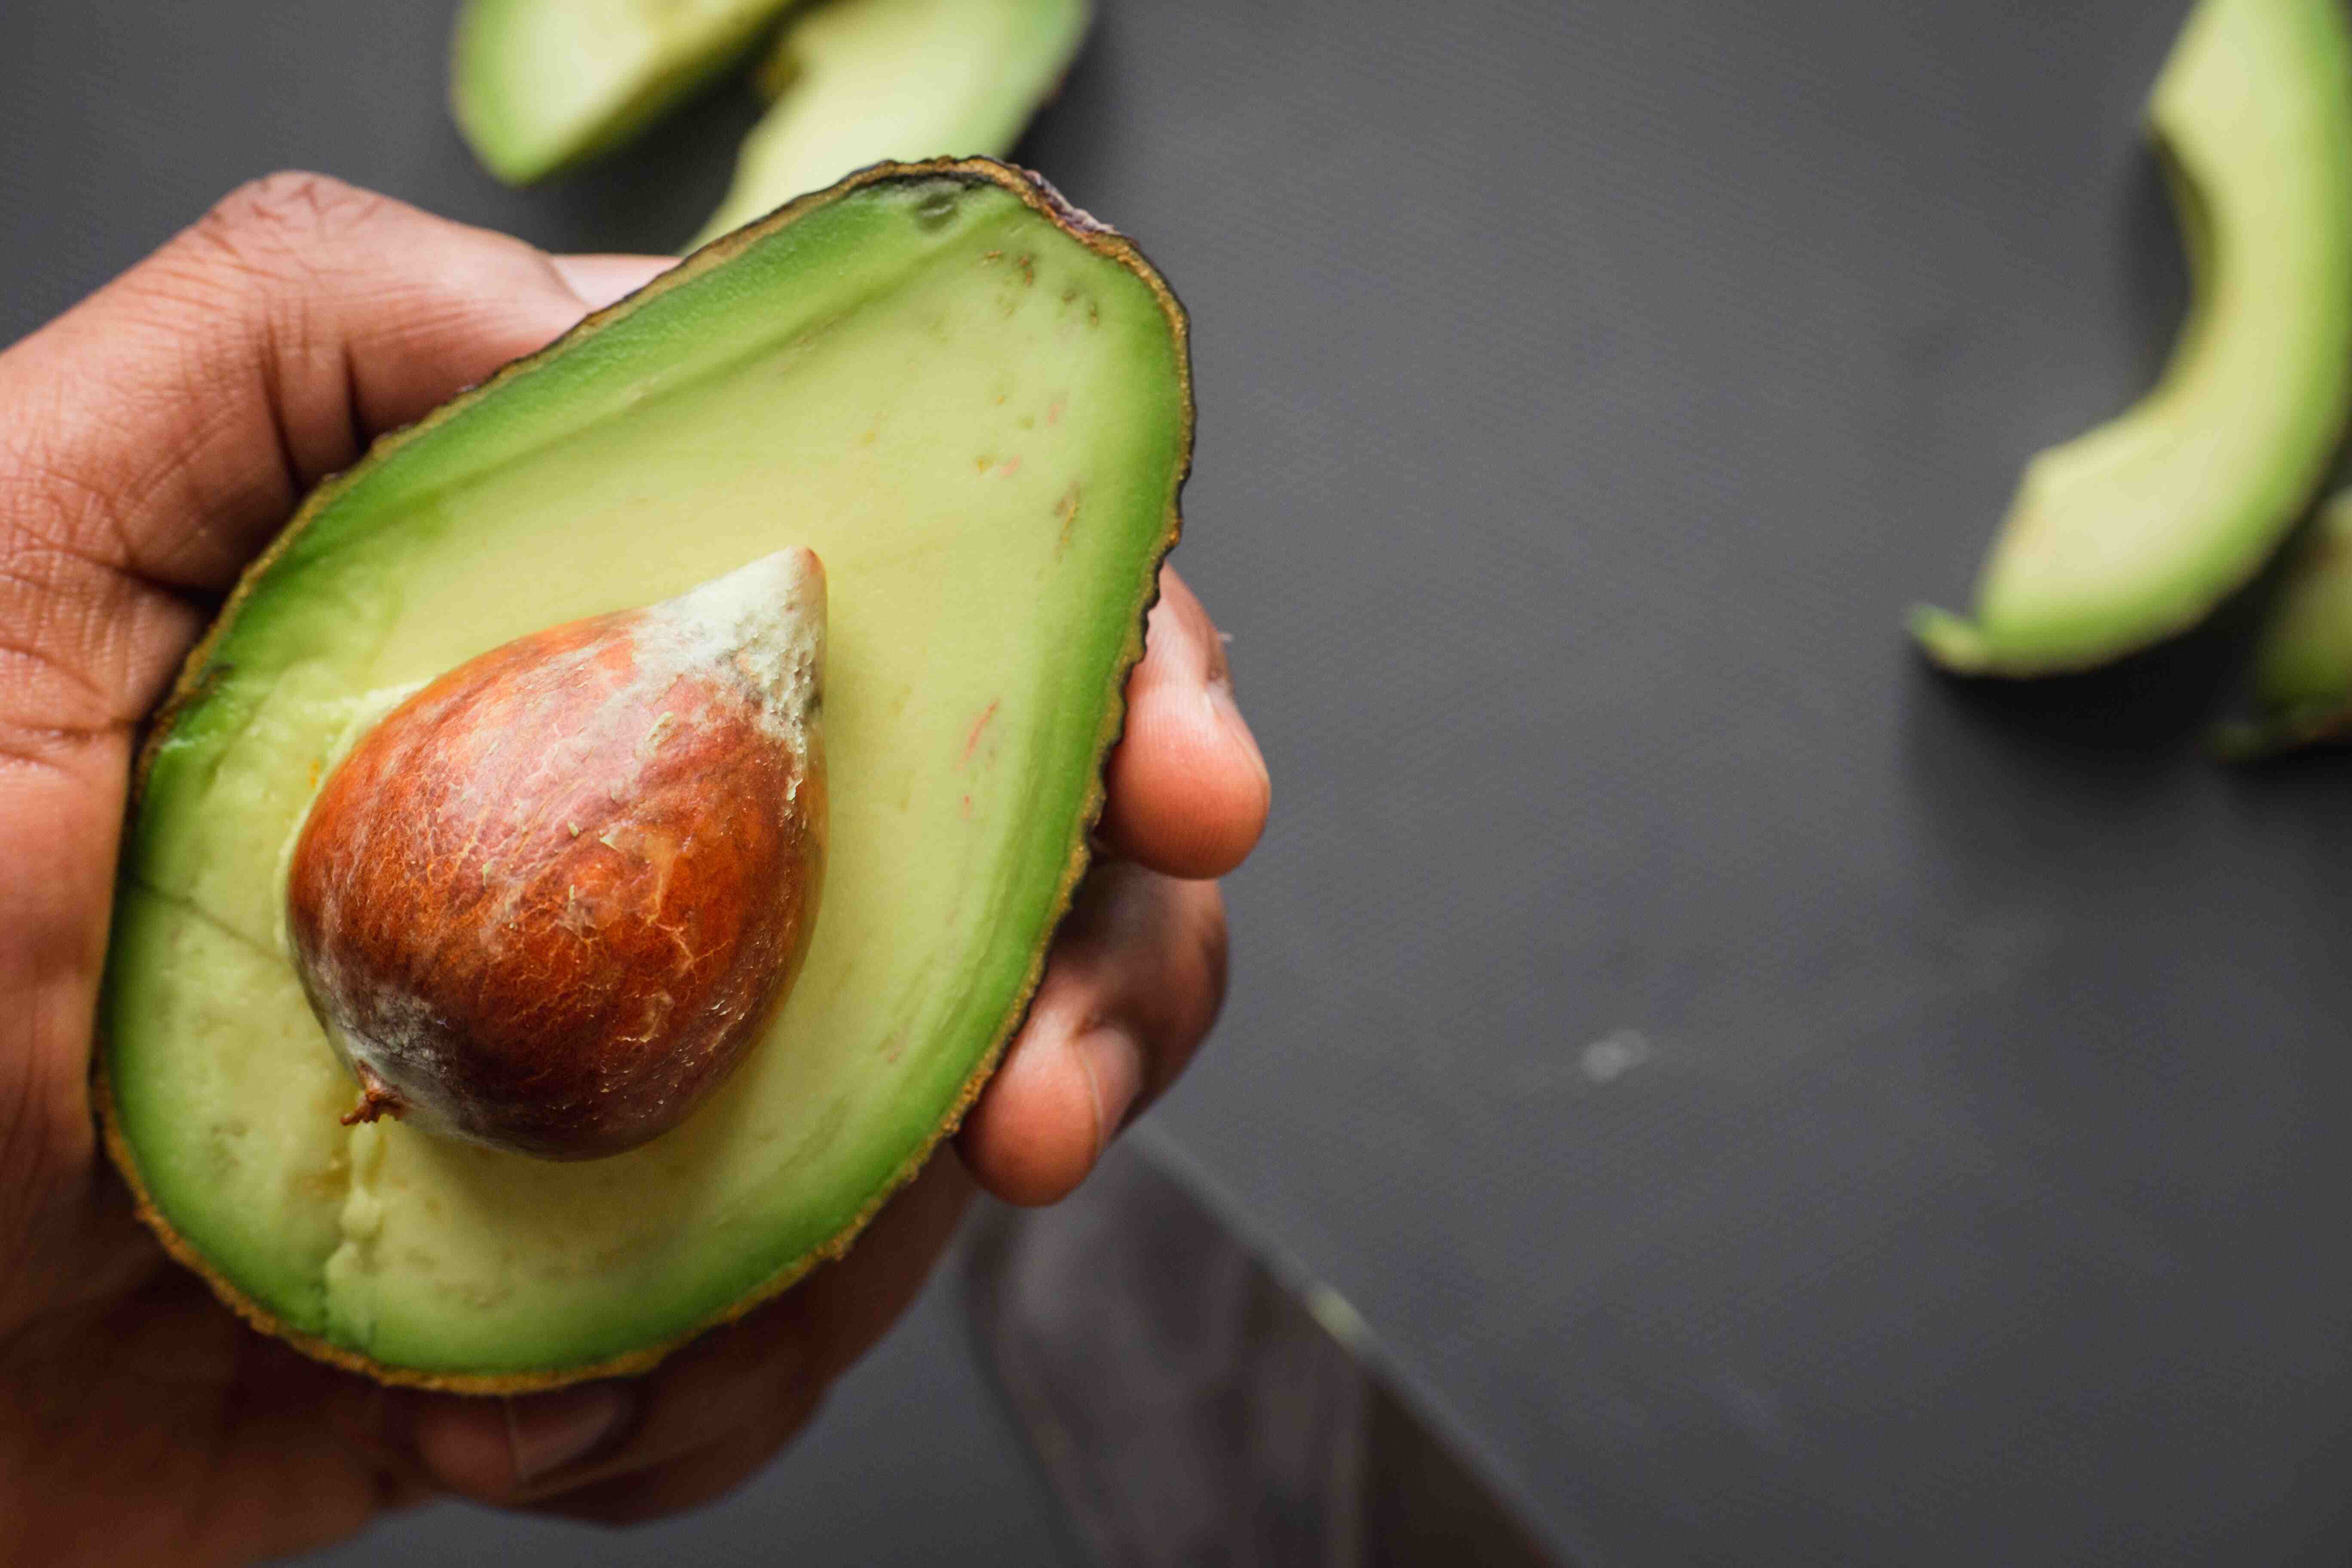 What Are Avocado Seeds Good For